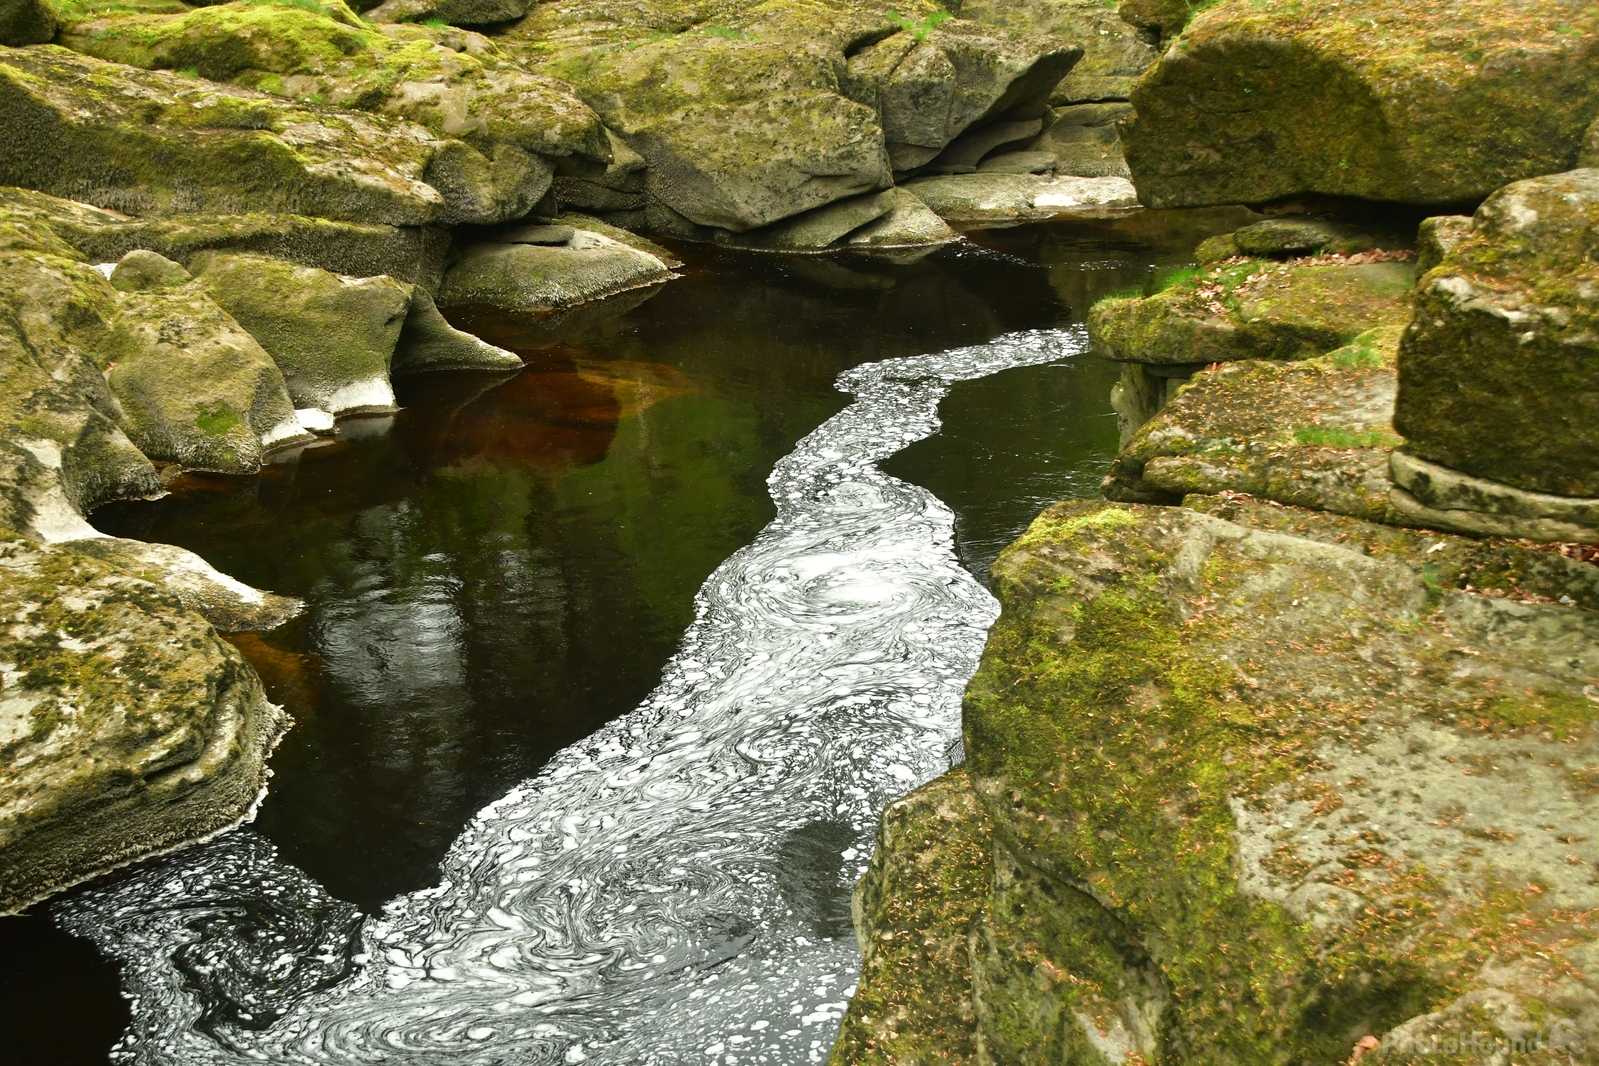 Image of The Strid, Wharfedale by Philip Eptlett